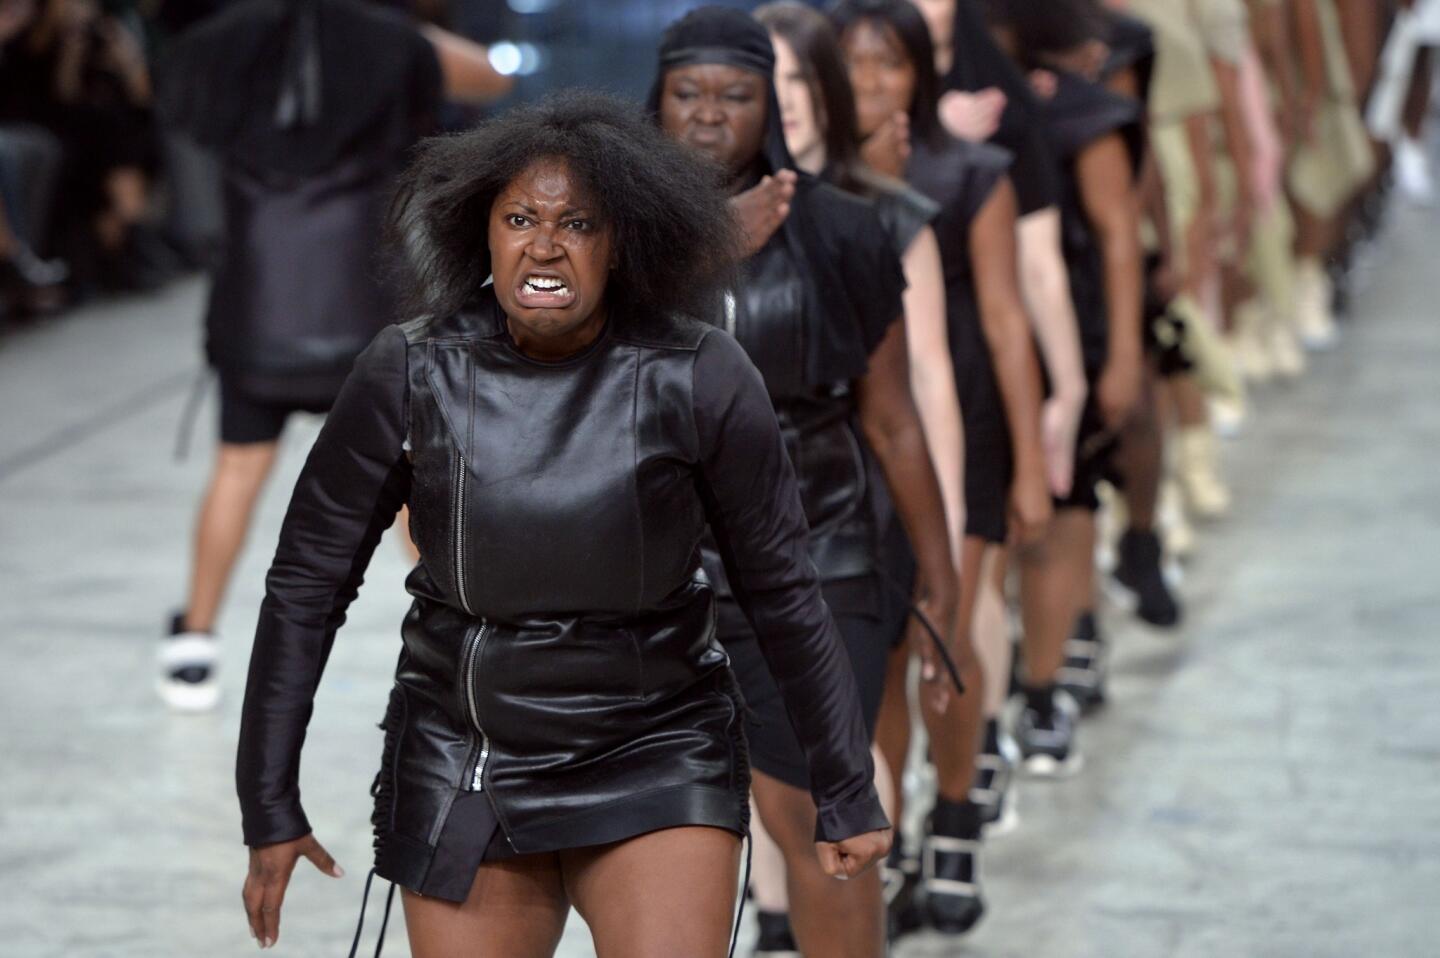 Models perform as they present creations by Rick Owens at spring/summer 2014 Paris Fashion Week.